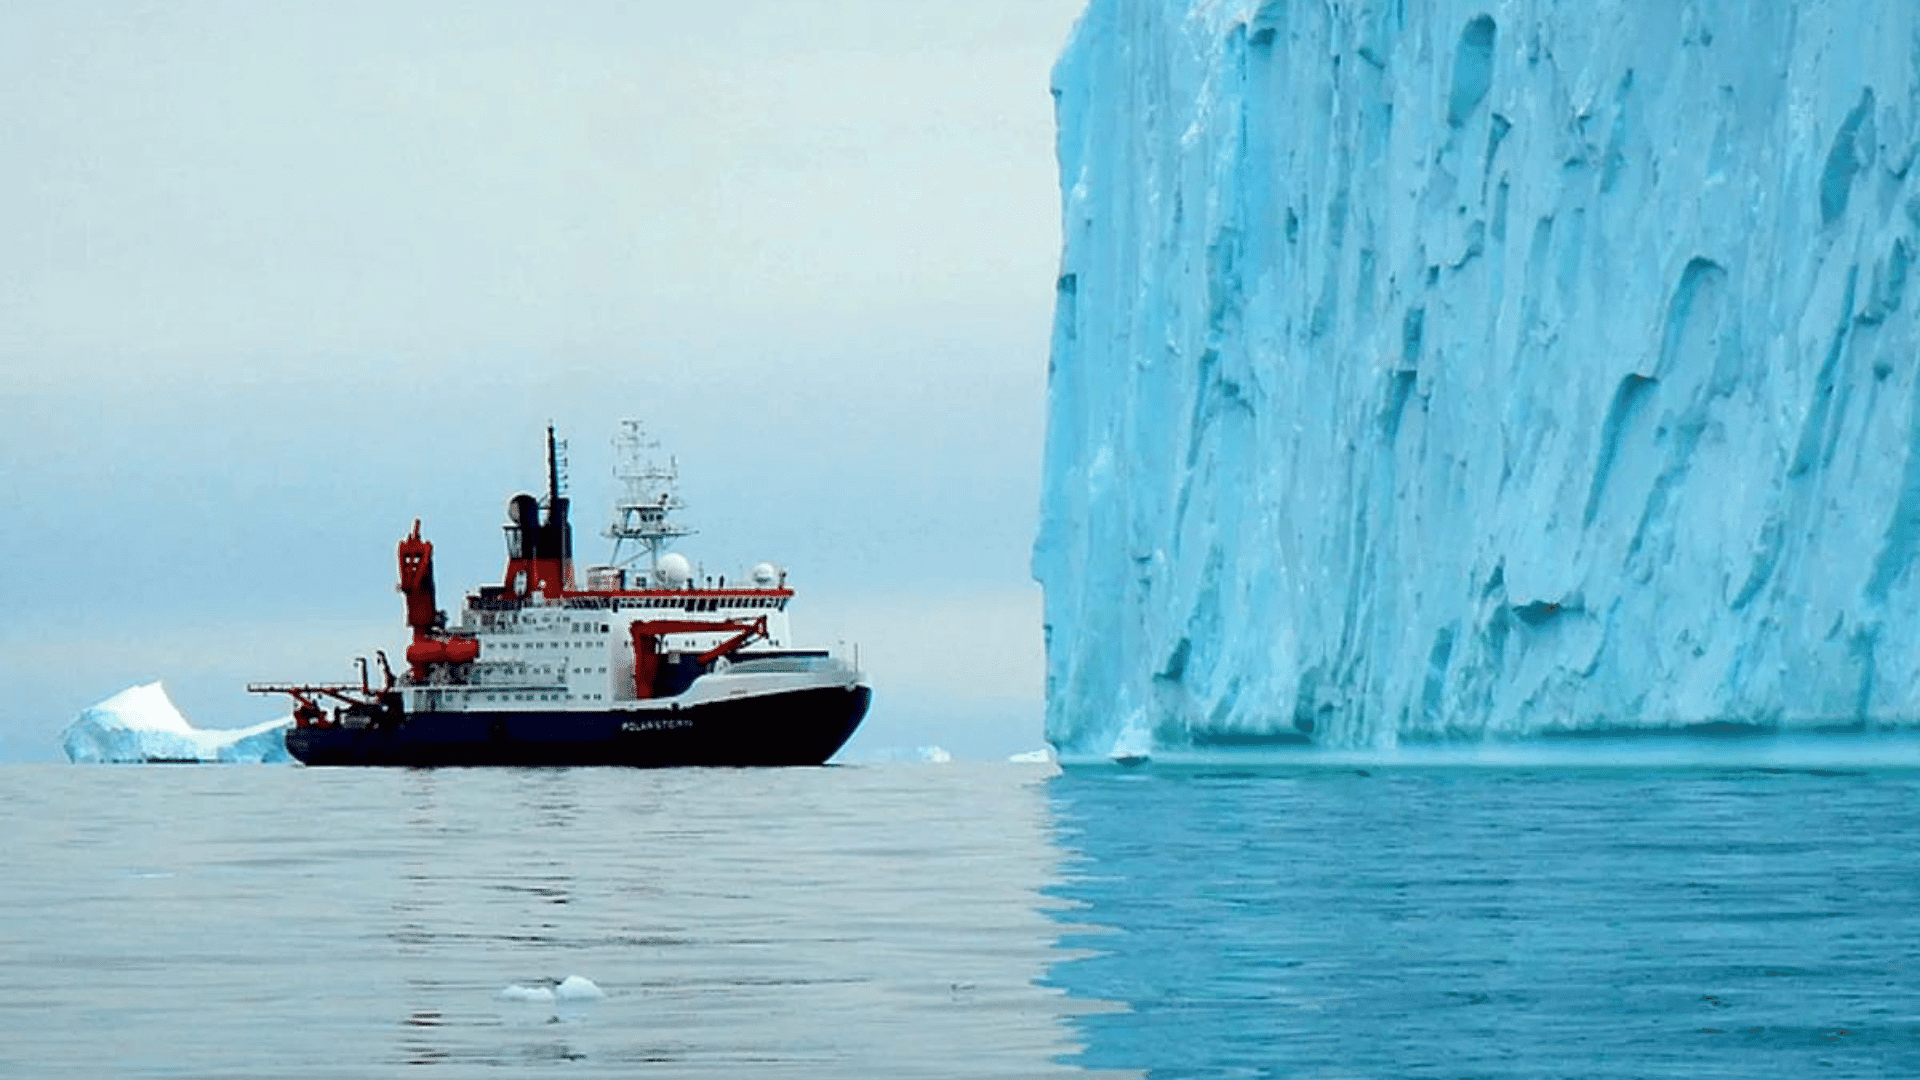 The research vessel Polarstern next to an ice sheet in the Amundsen Sea, where sediments from central Antarctica were found. Image credit: Johann Klages:AWI